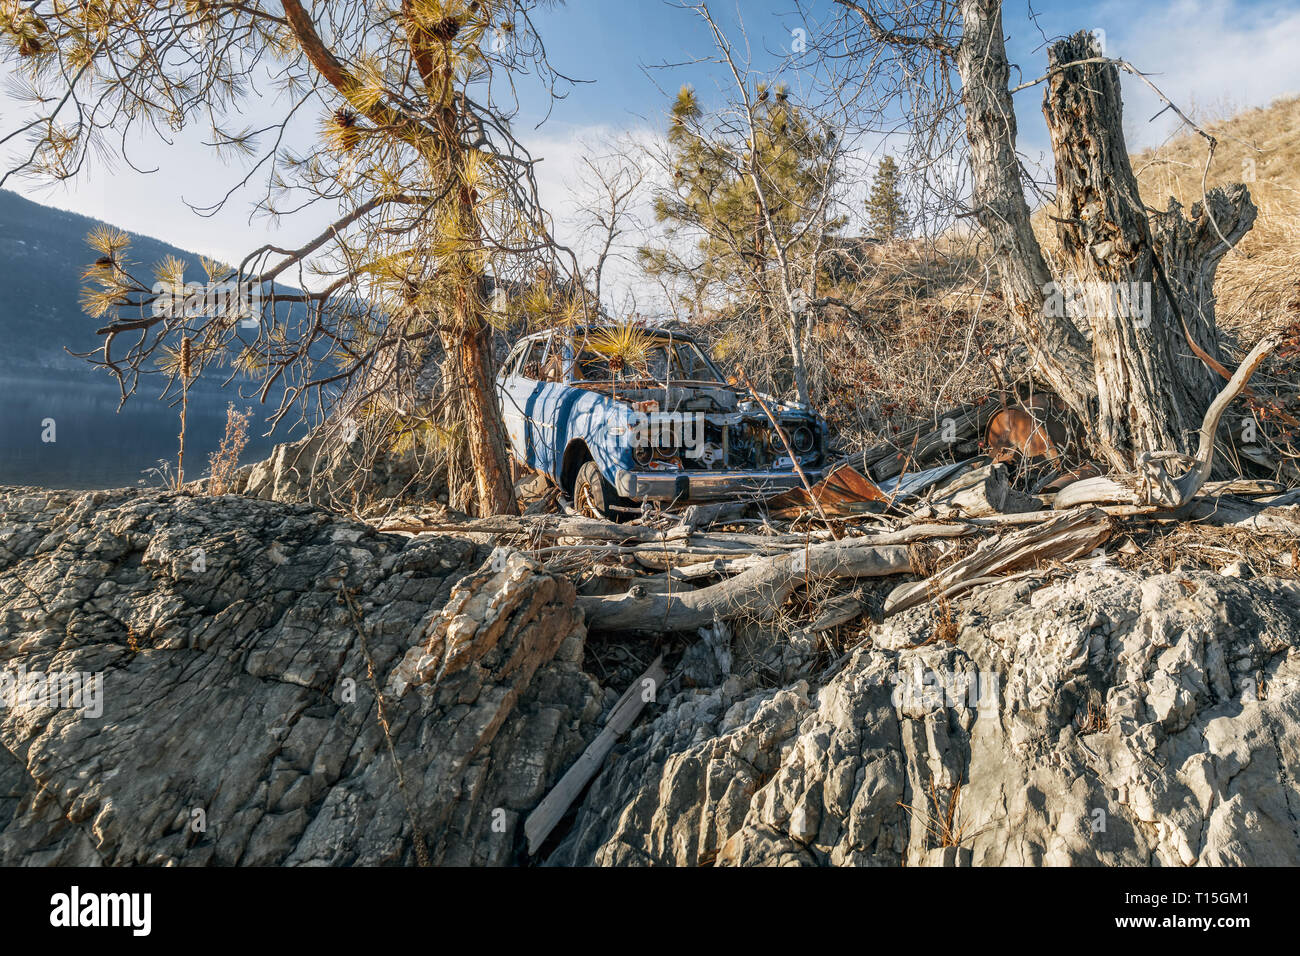 Dumped Car in middle of trees - Abandoned car in middle of trees - Kelowna, Okanagan Lake, Canada - Image Stock Photo